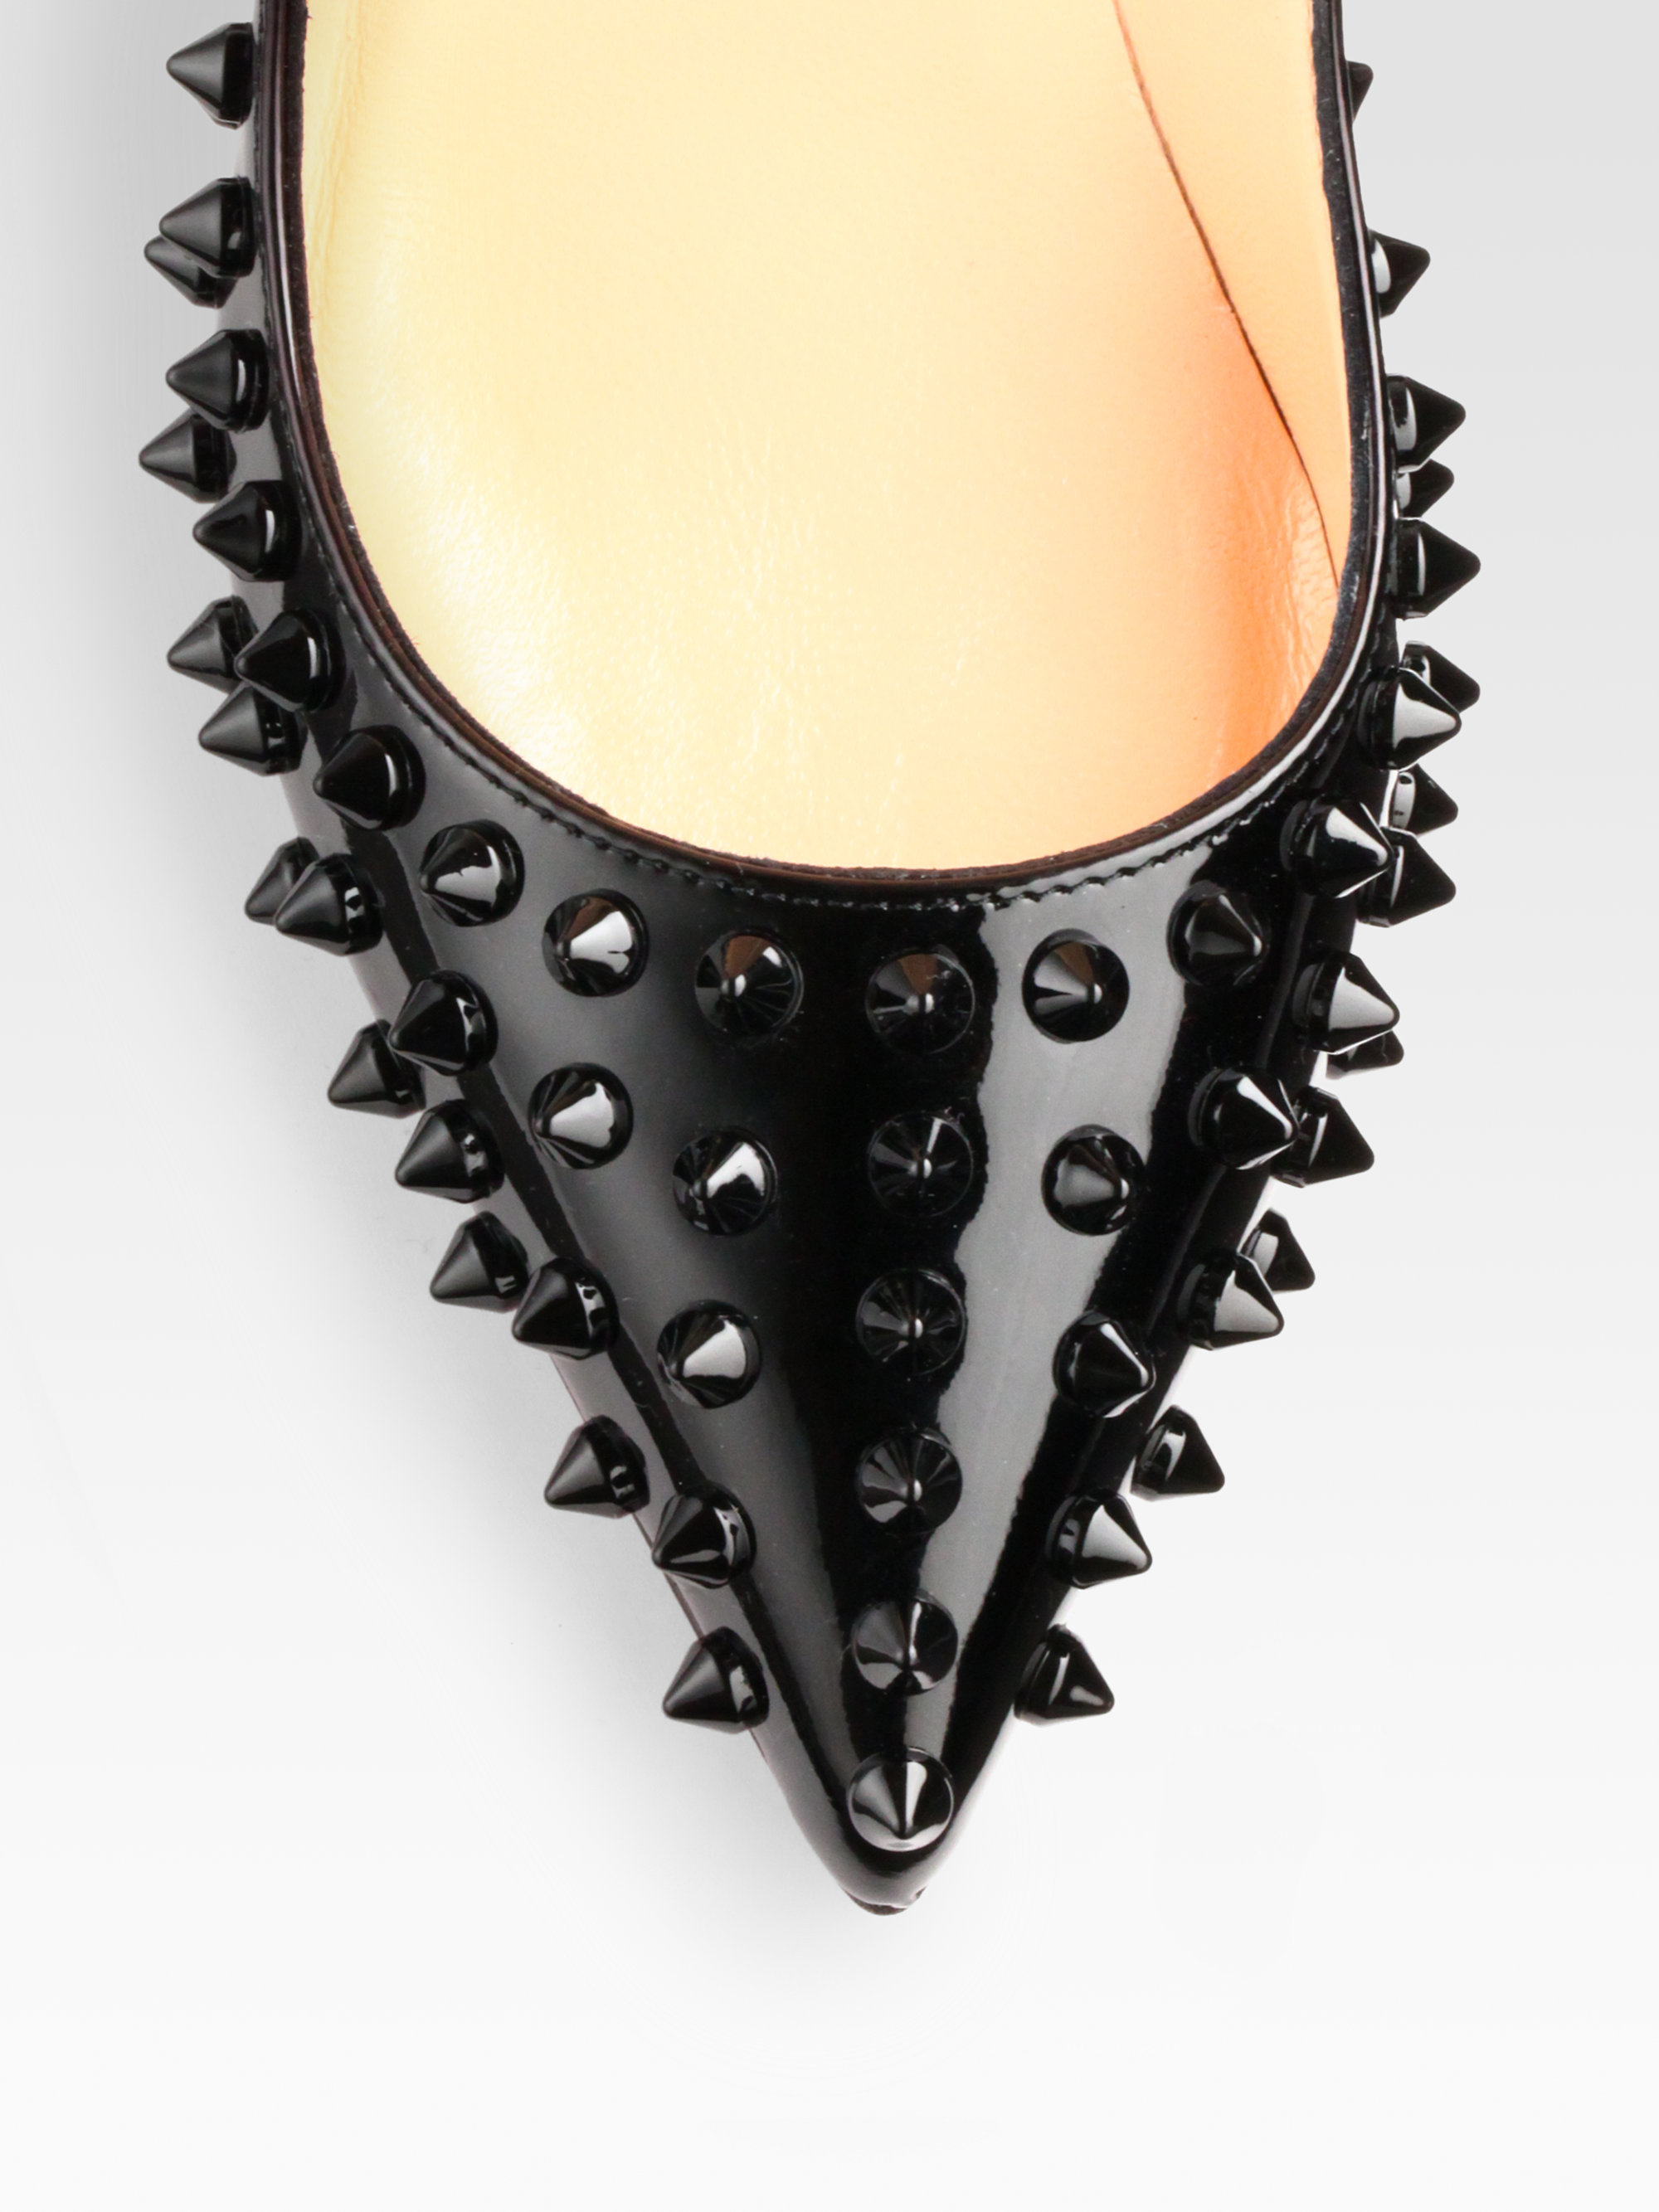 Christian Louboutin Pigalle 120m Spikes Patent Leather Pumps in Black | Lyst